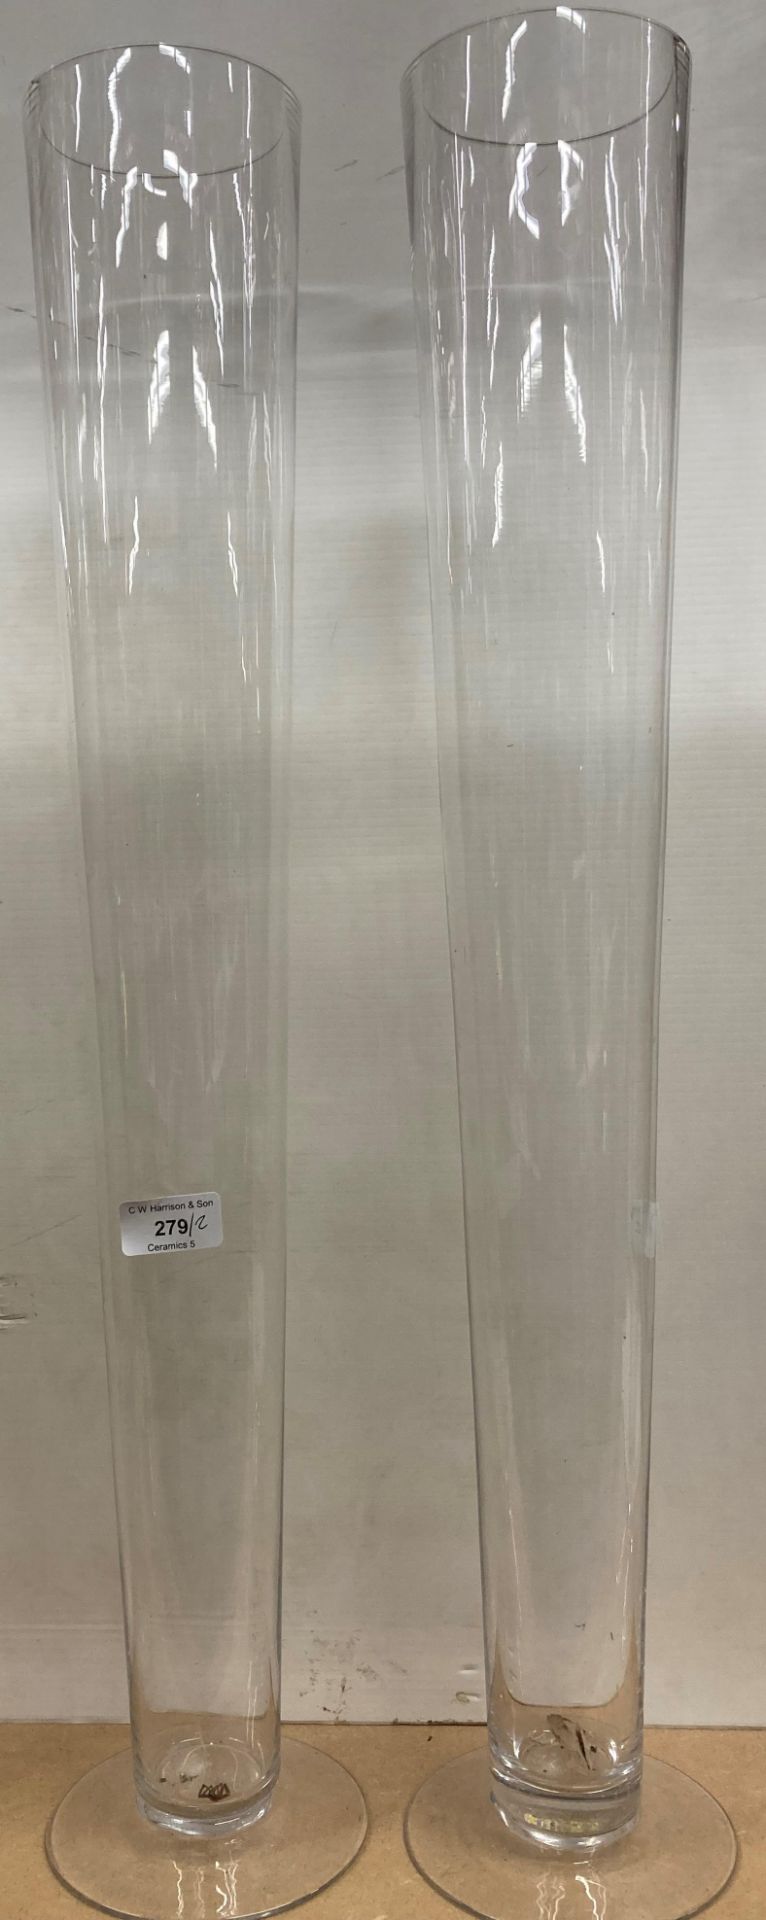 Two large glass vases 68cm